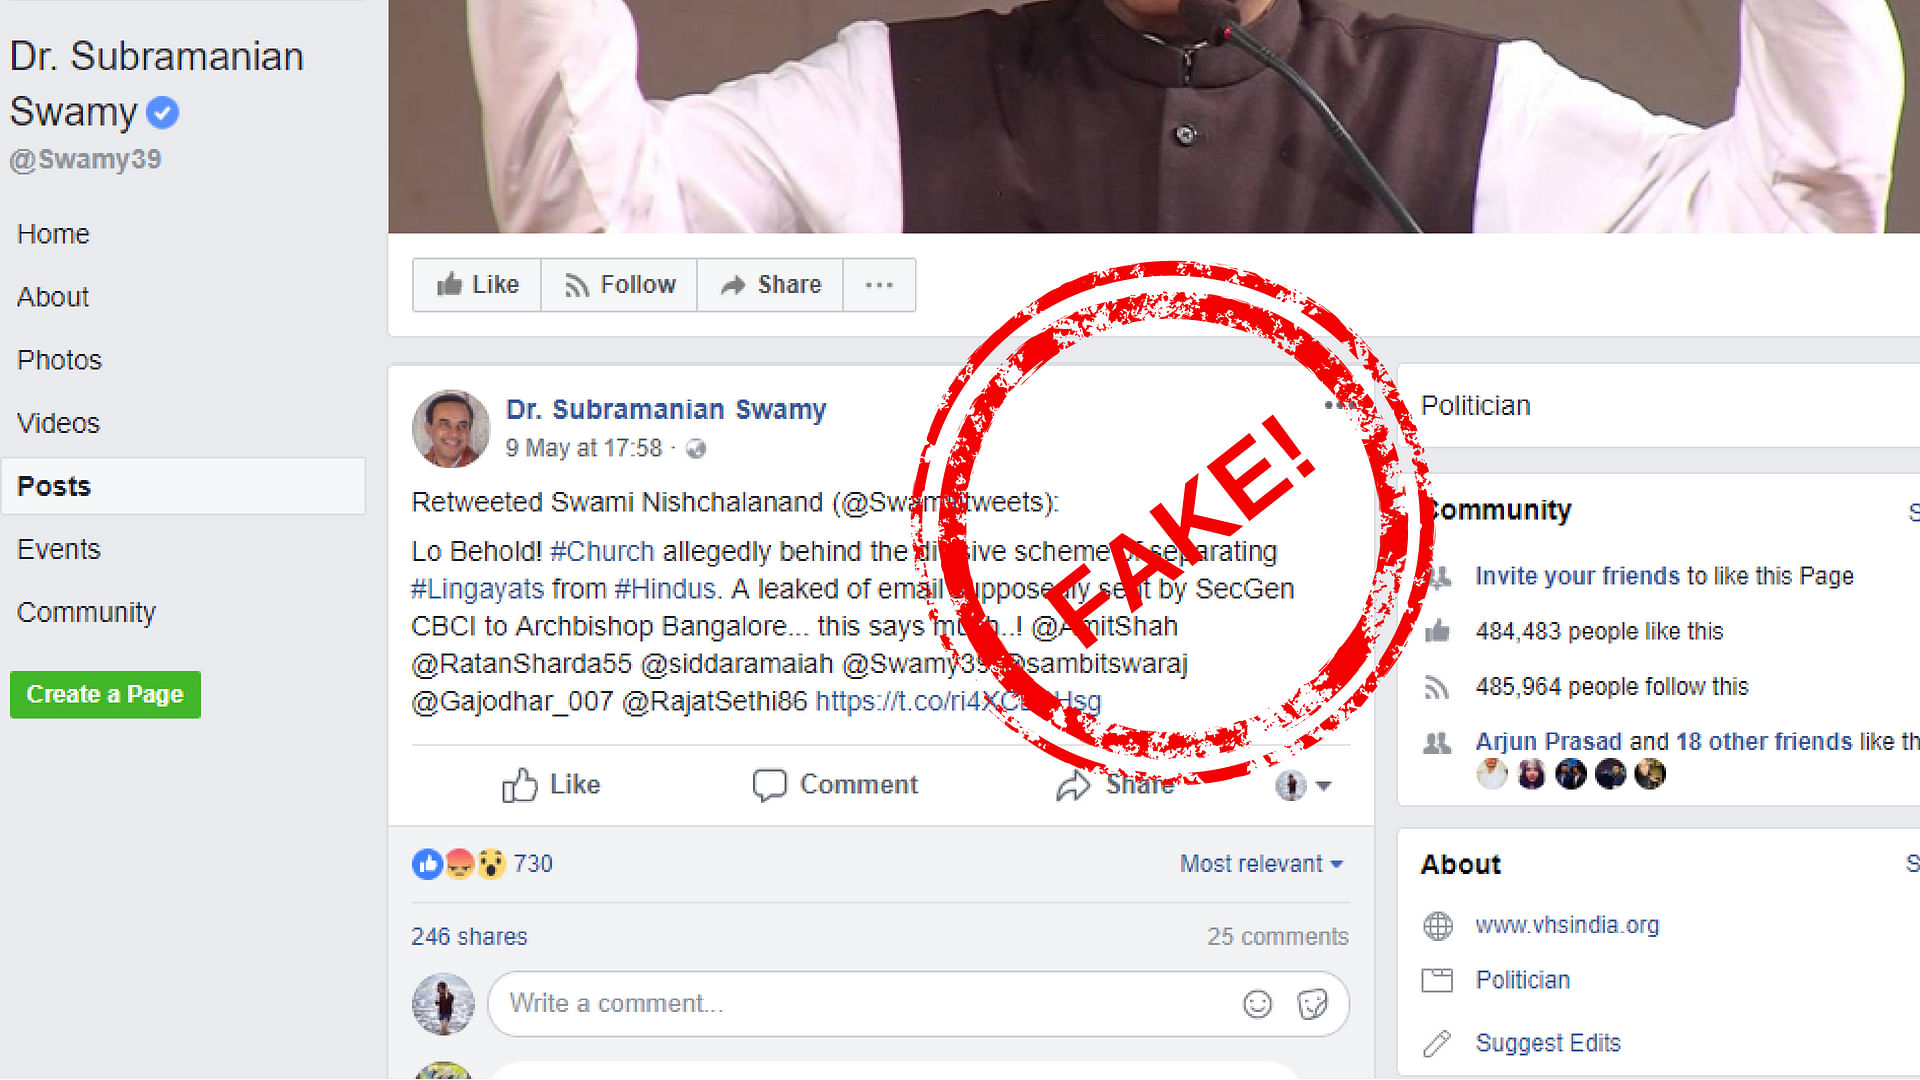 Since the user @swamijitweets has deleted his tweet, the retweeted tweet cannot be seen on Subramanian Swamy’s Twitter timeline anymore. However, Swamy’s tweets get pushed to his official Facebook page which still carries evidence of him having retweeted the tweet.